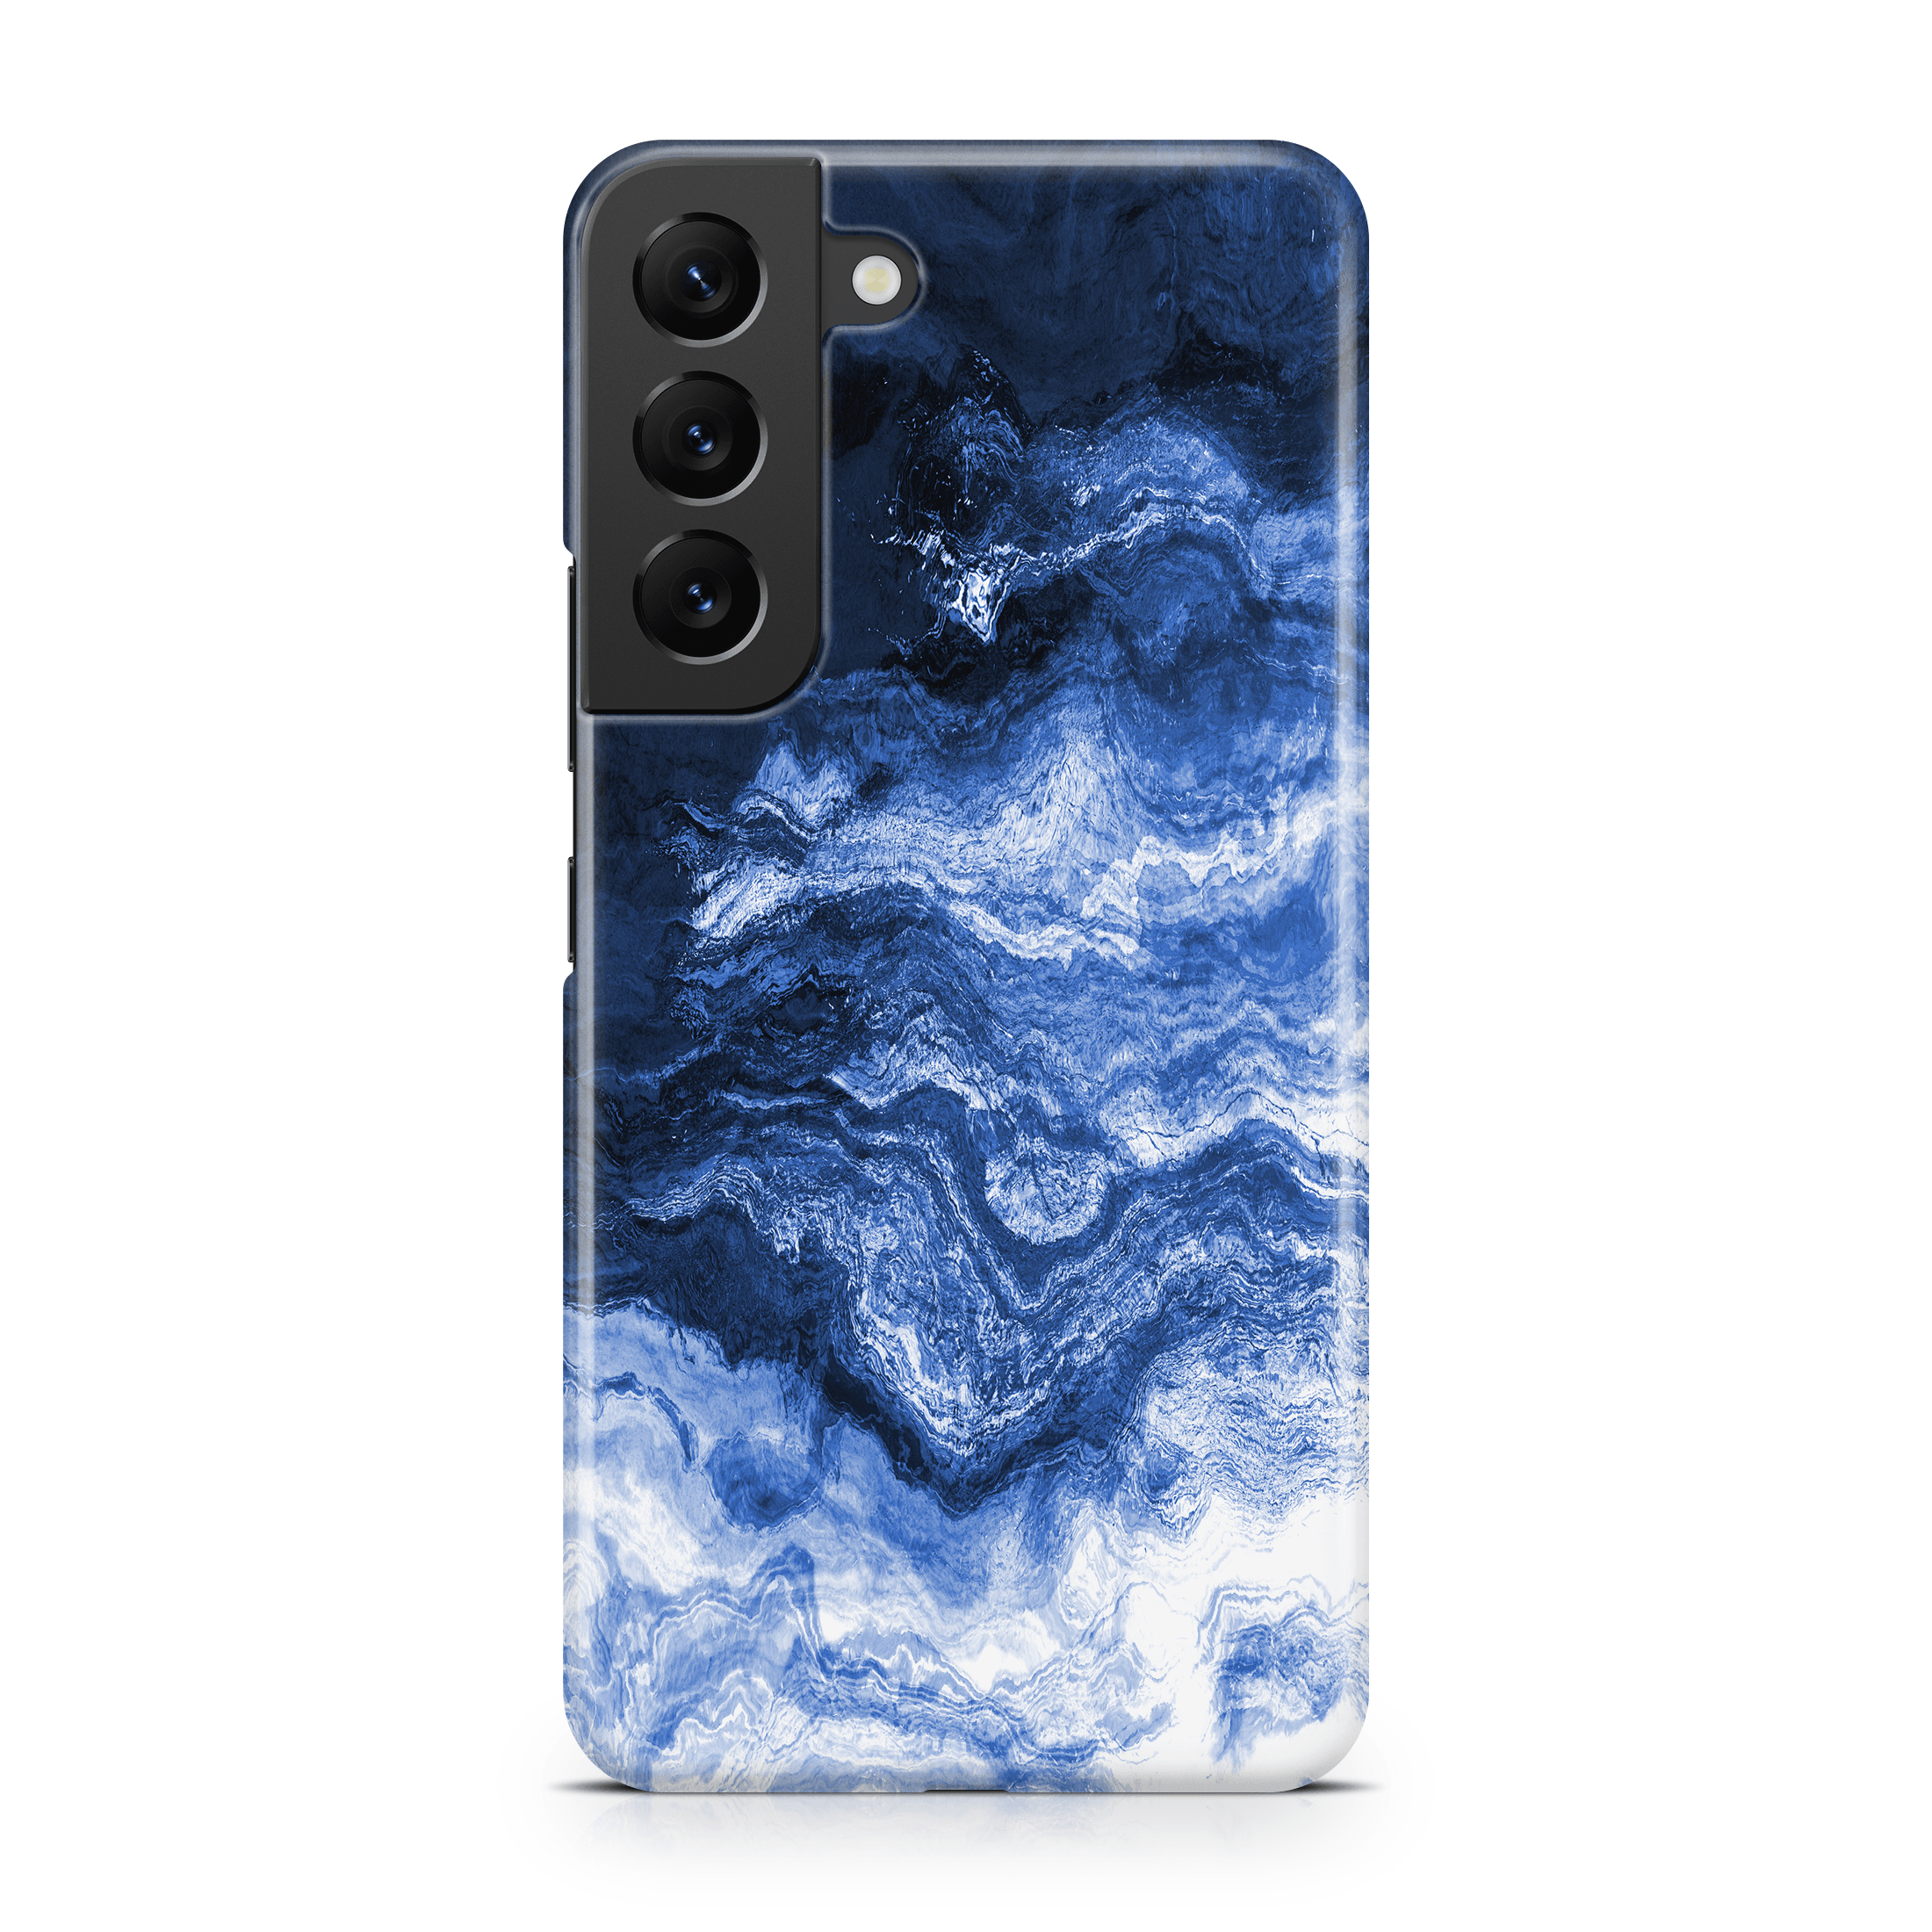 Blue Runner - Samsung phone case designs by CaseSwagger